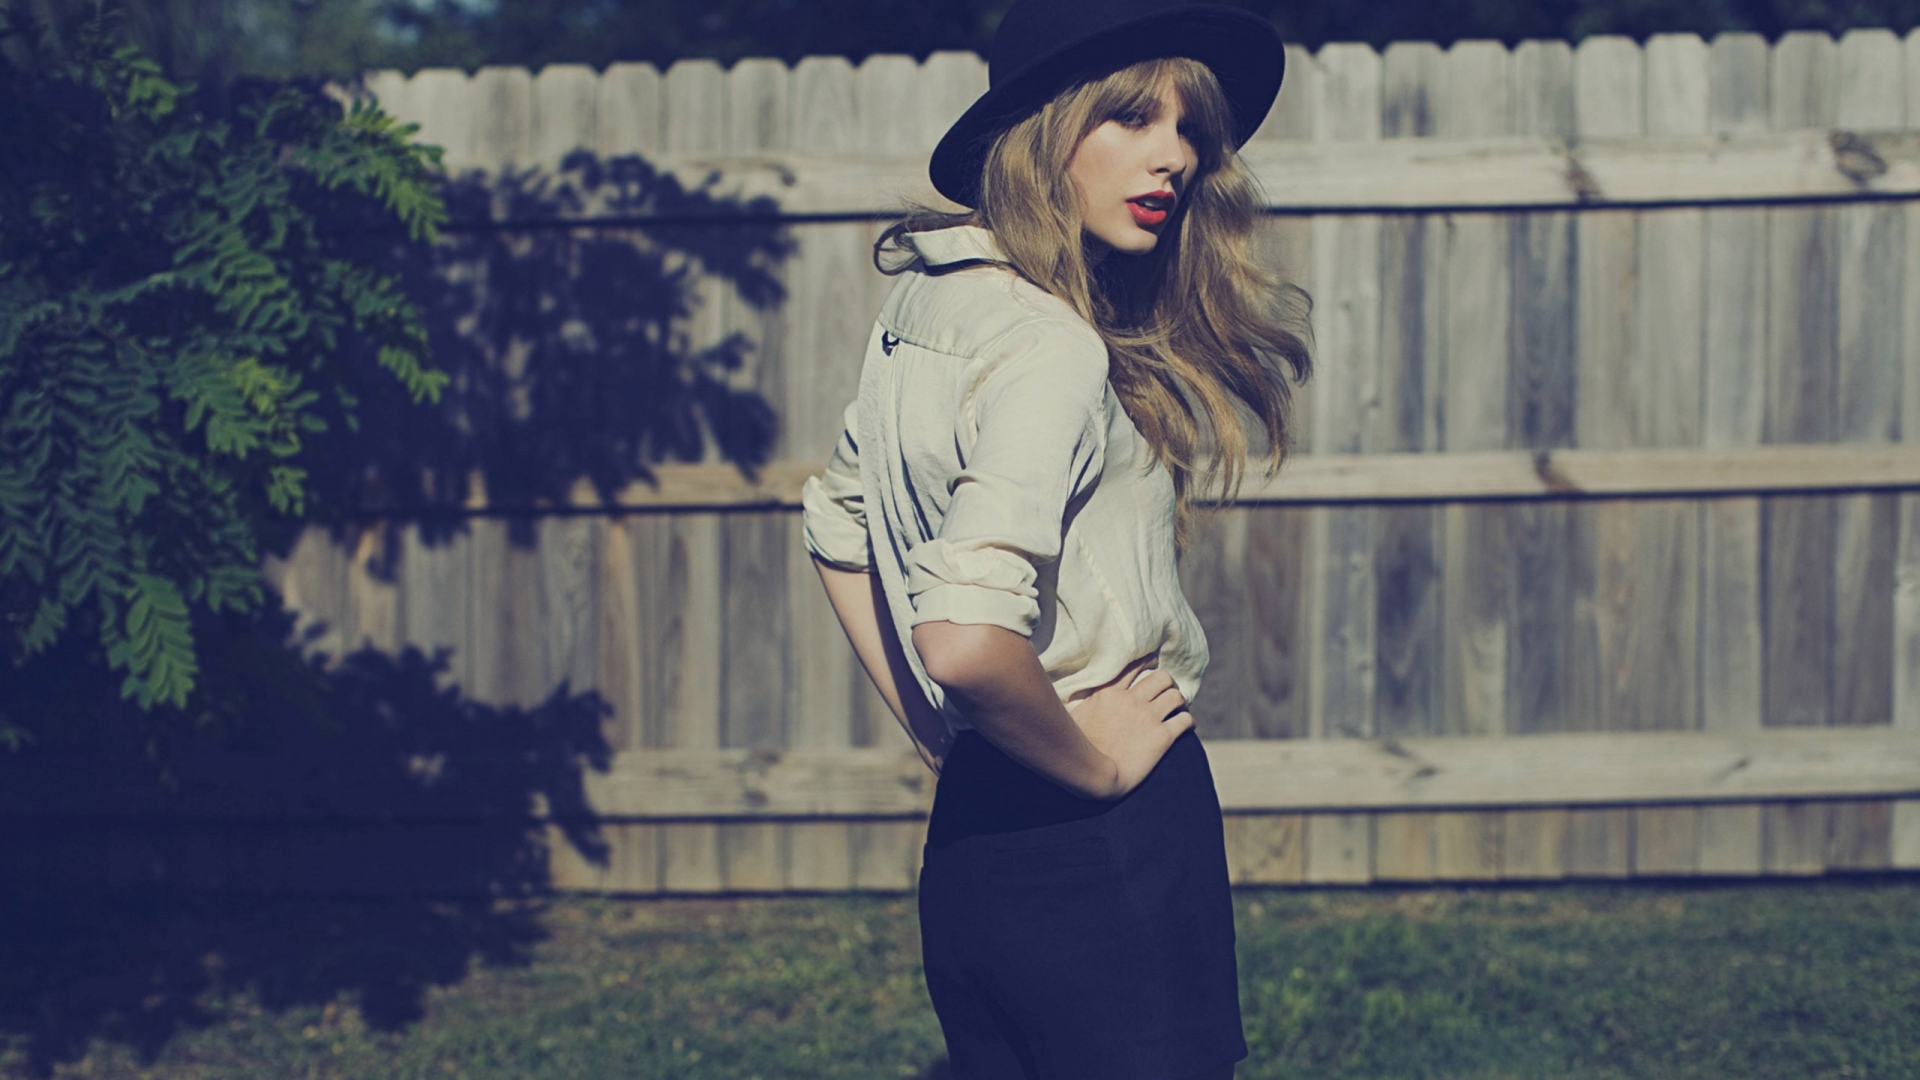 Taylor Swift Pose for 1920 x 1080 HDTV 1080p resolution